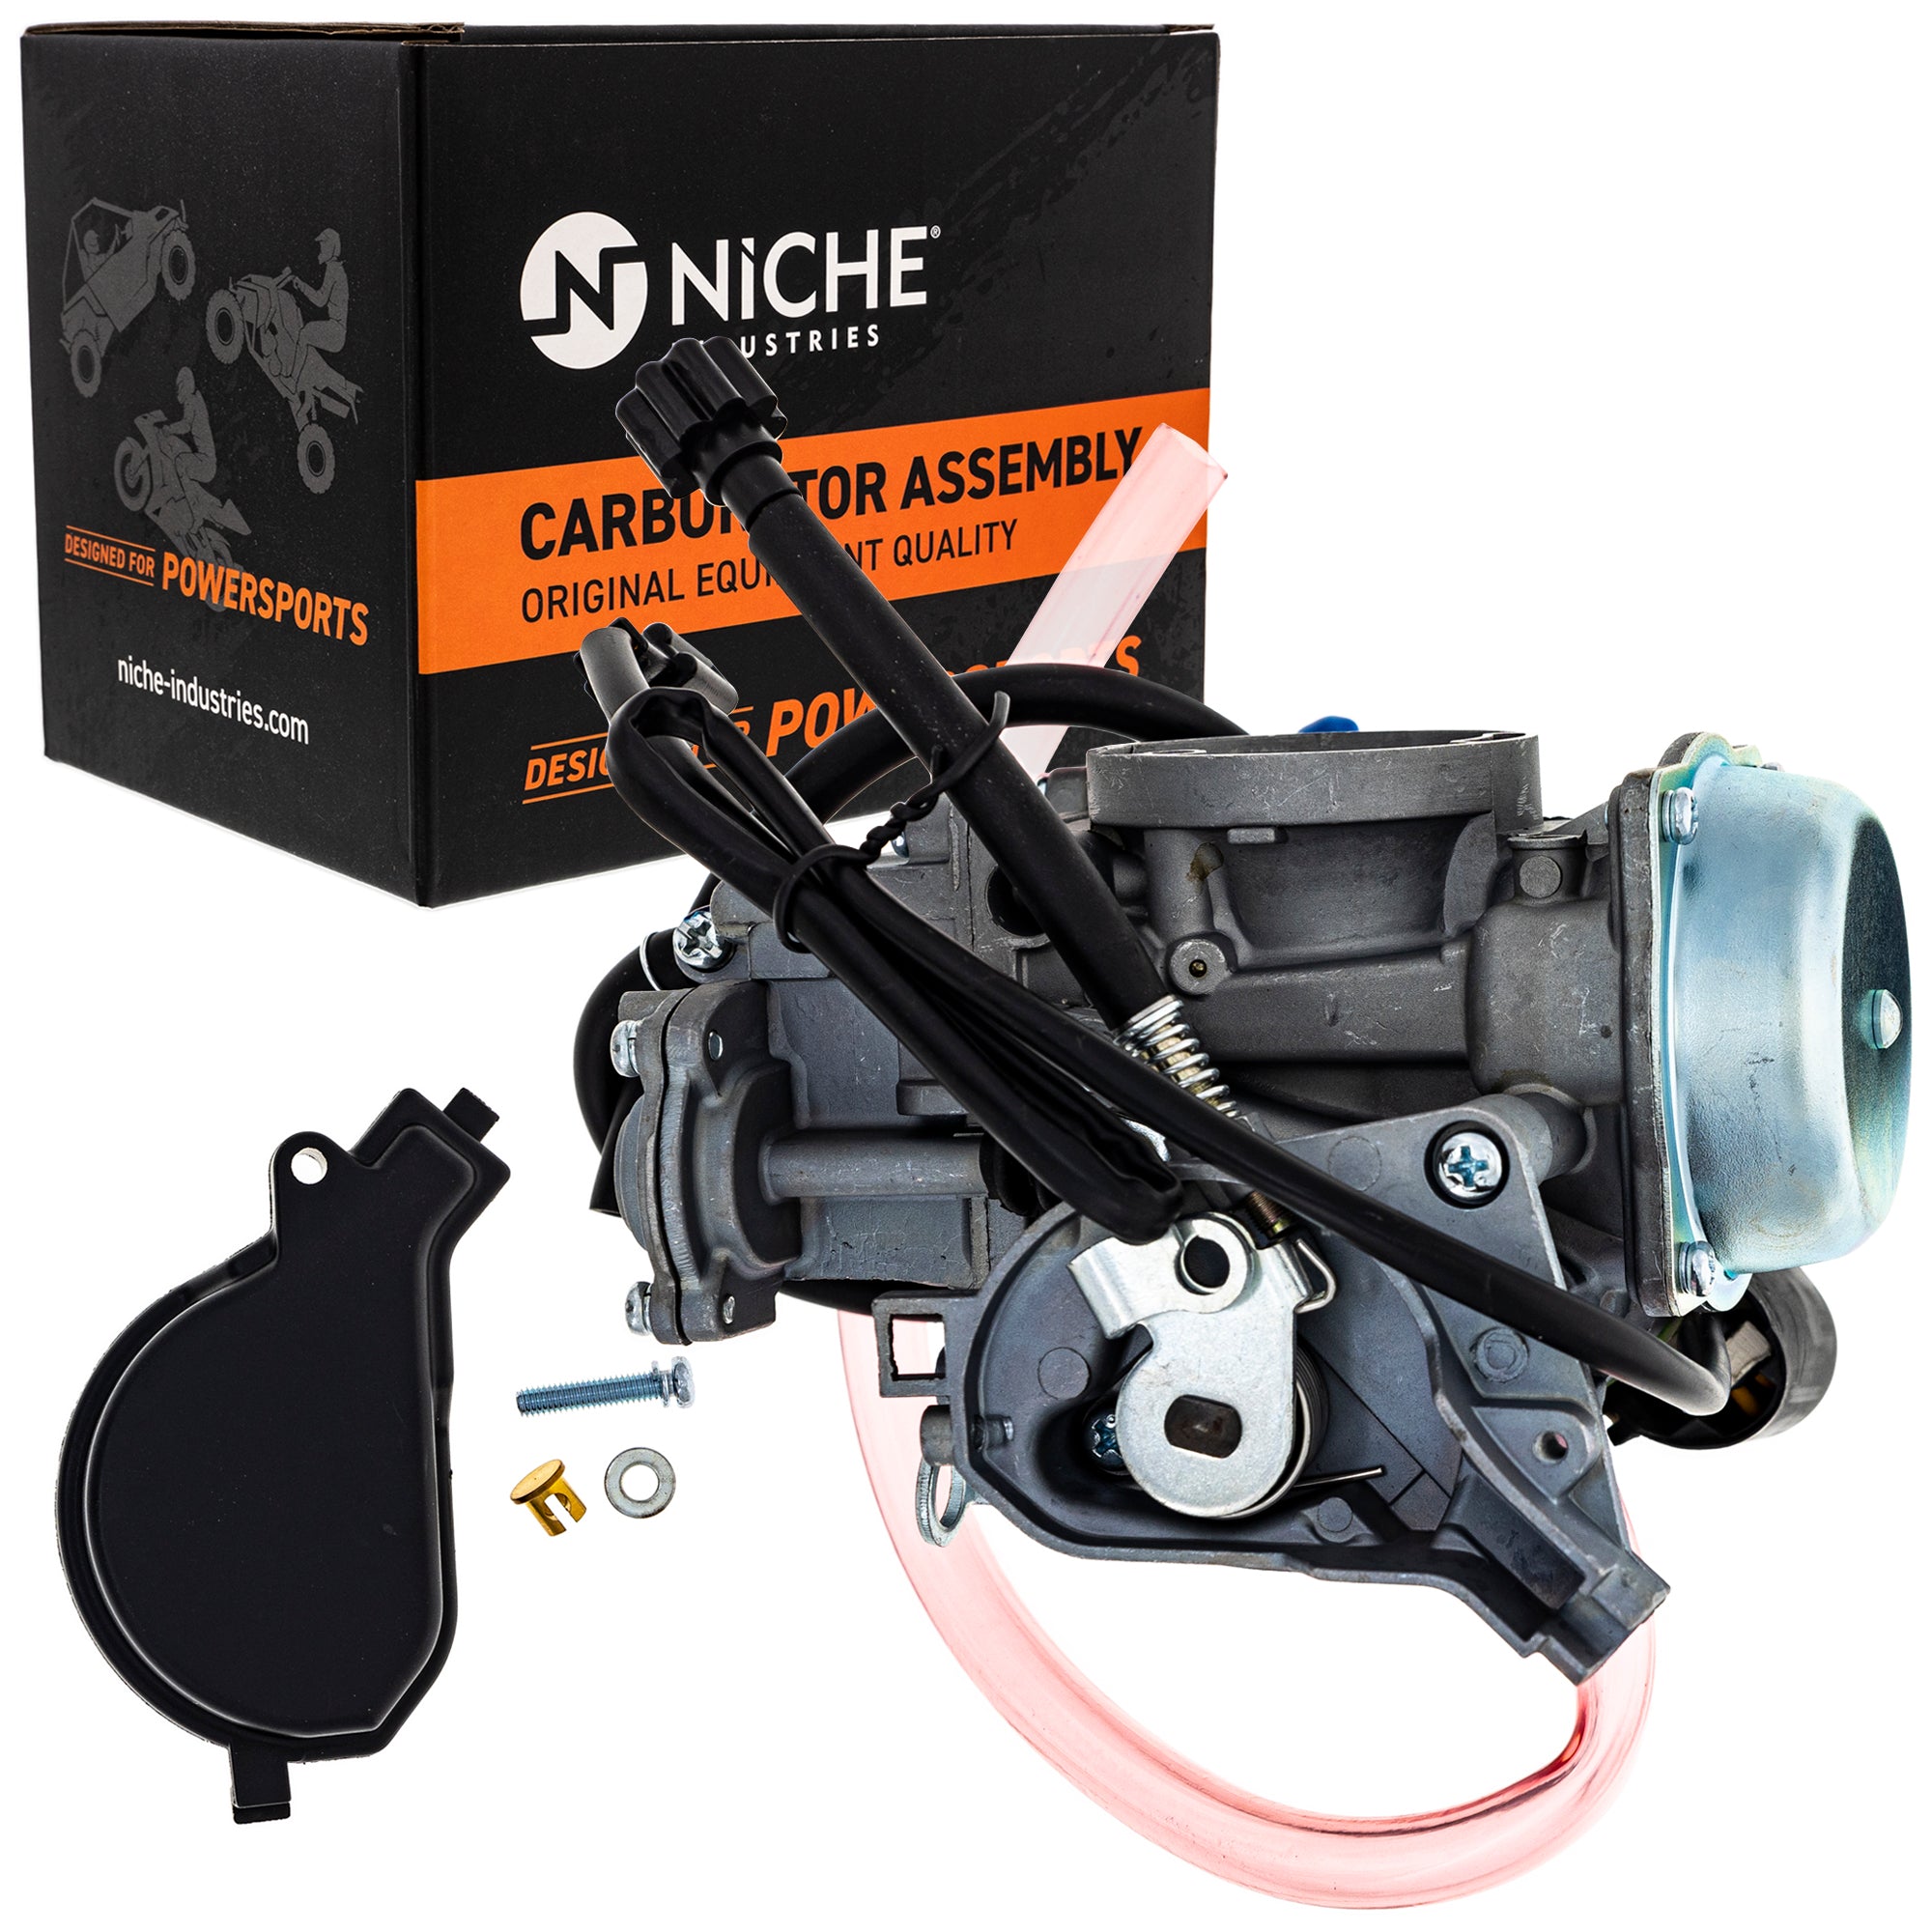 NICHE 519-KCR2212B Carburetor Assembly for zOTHER Arctic Cat Textron